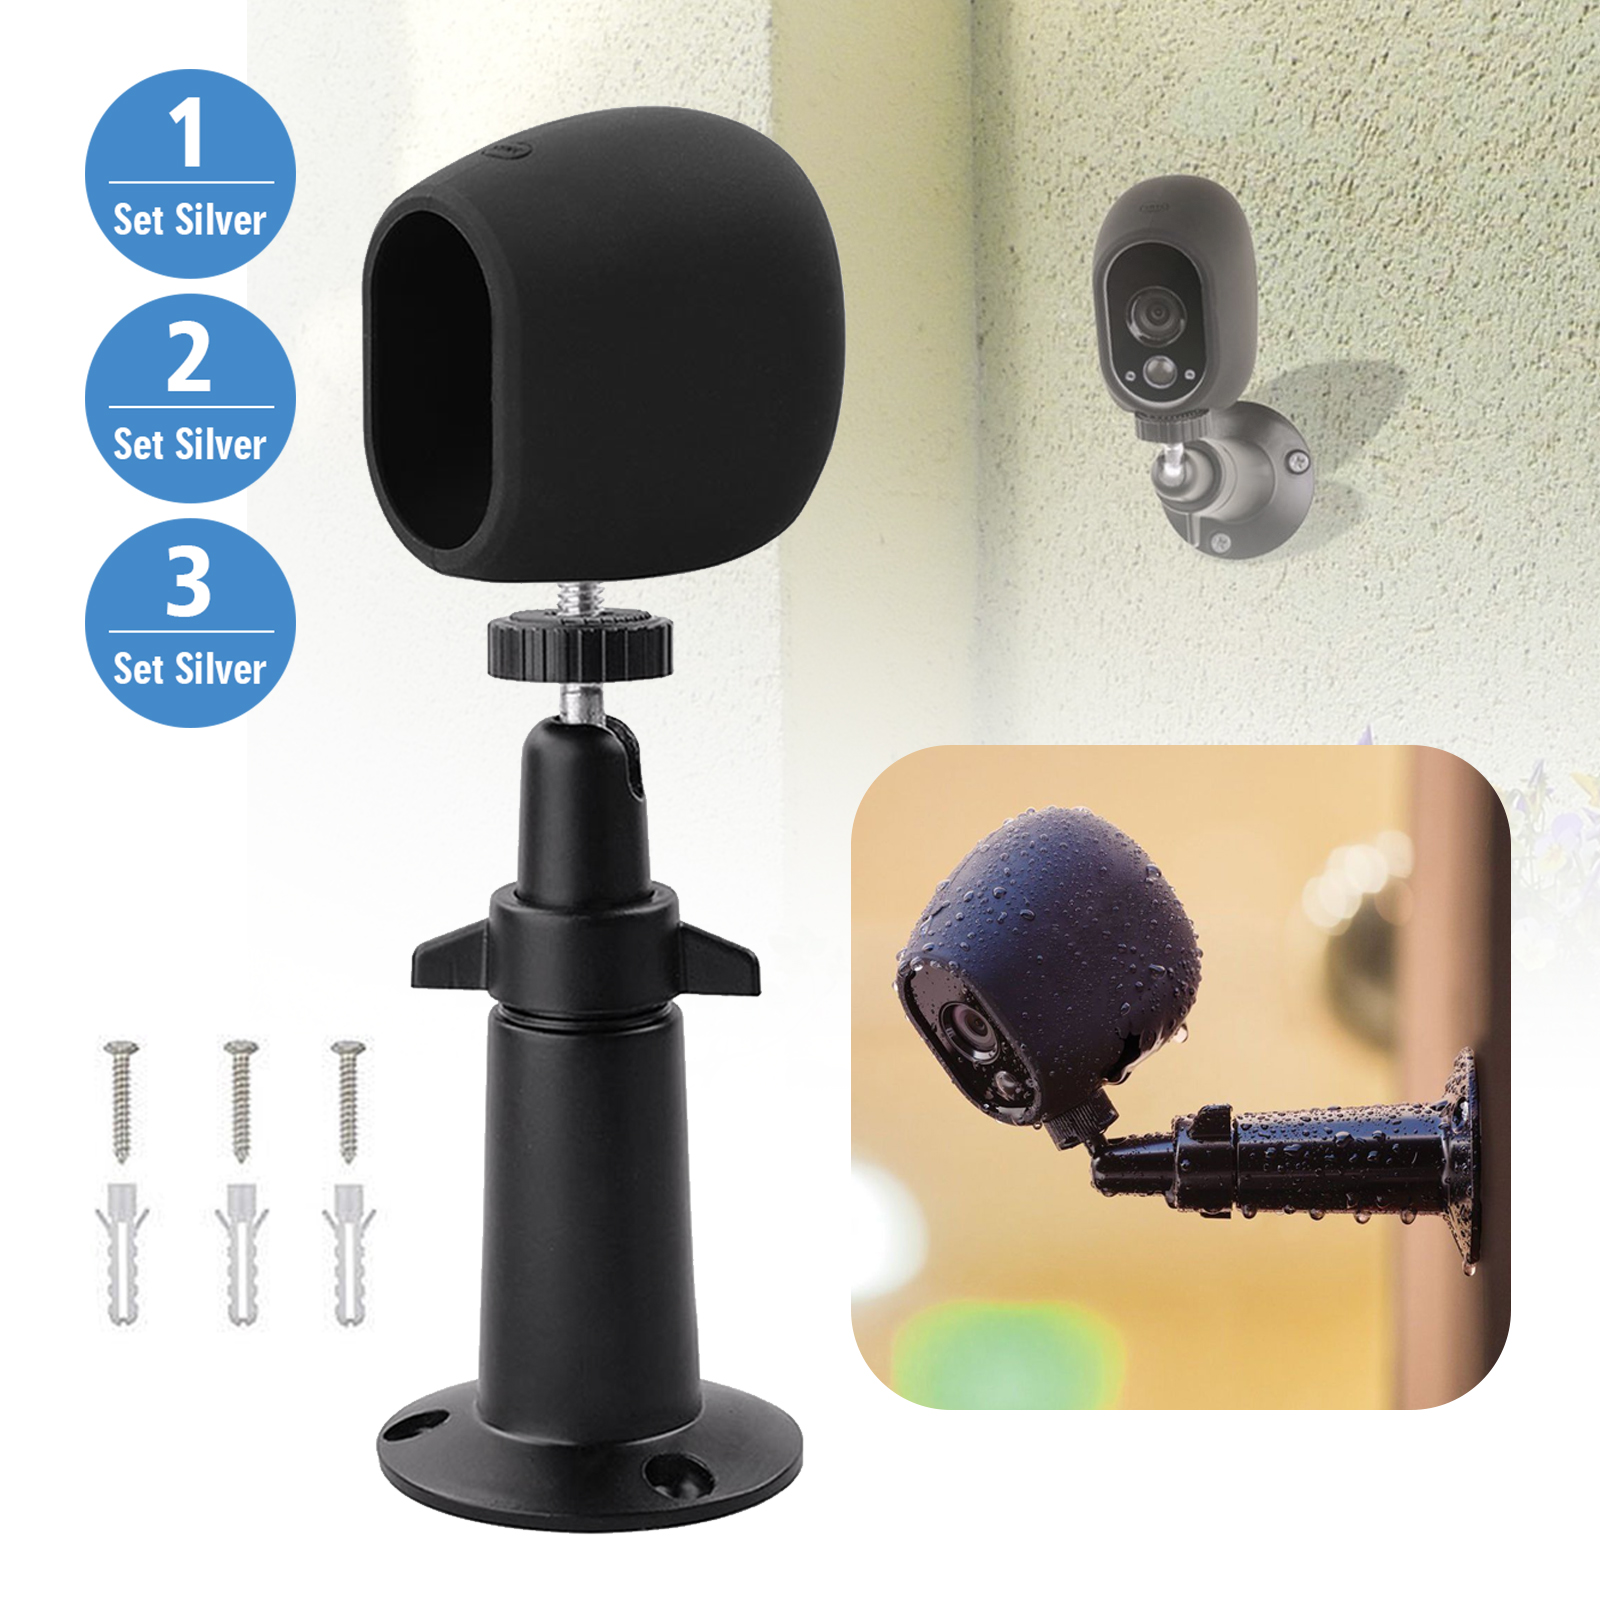 Outdoor Security Wall Mount+Silicone Skins Protective Cover Case for Arlo Camera eBay